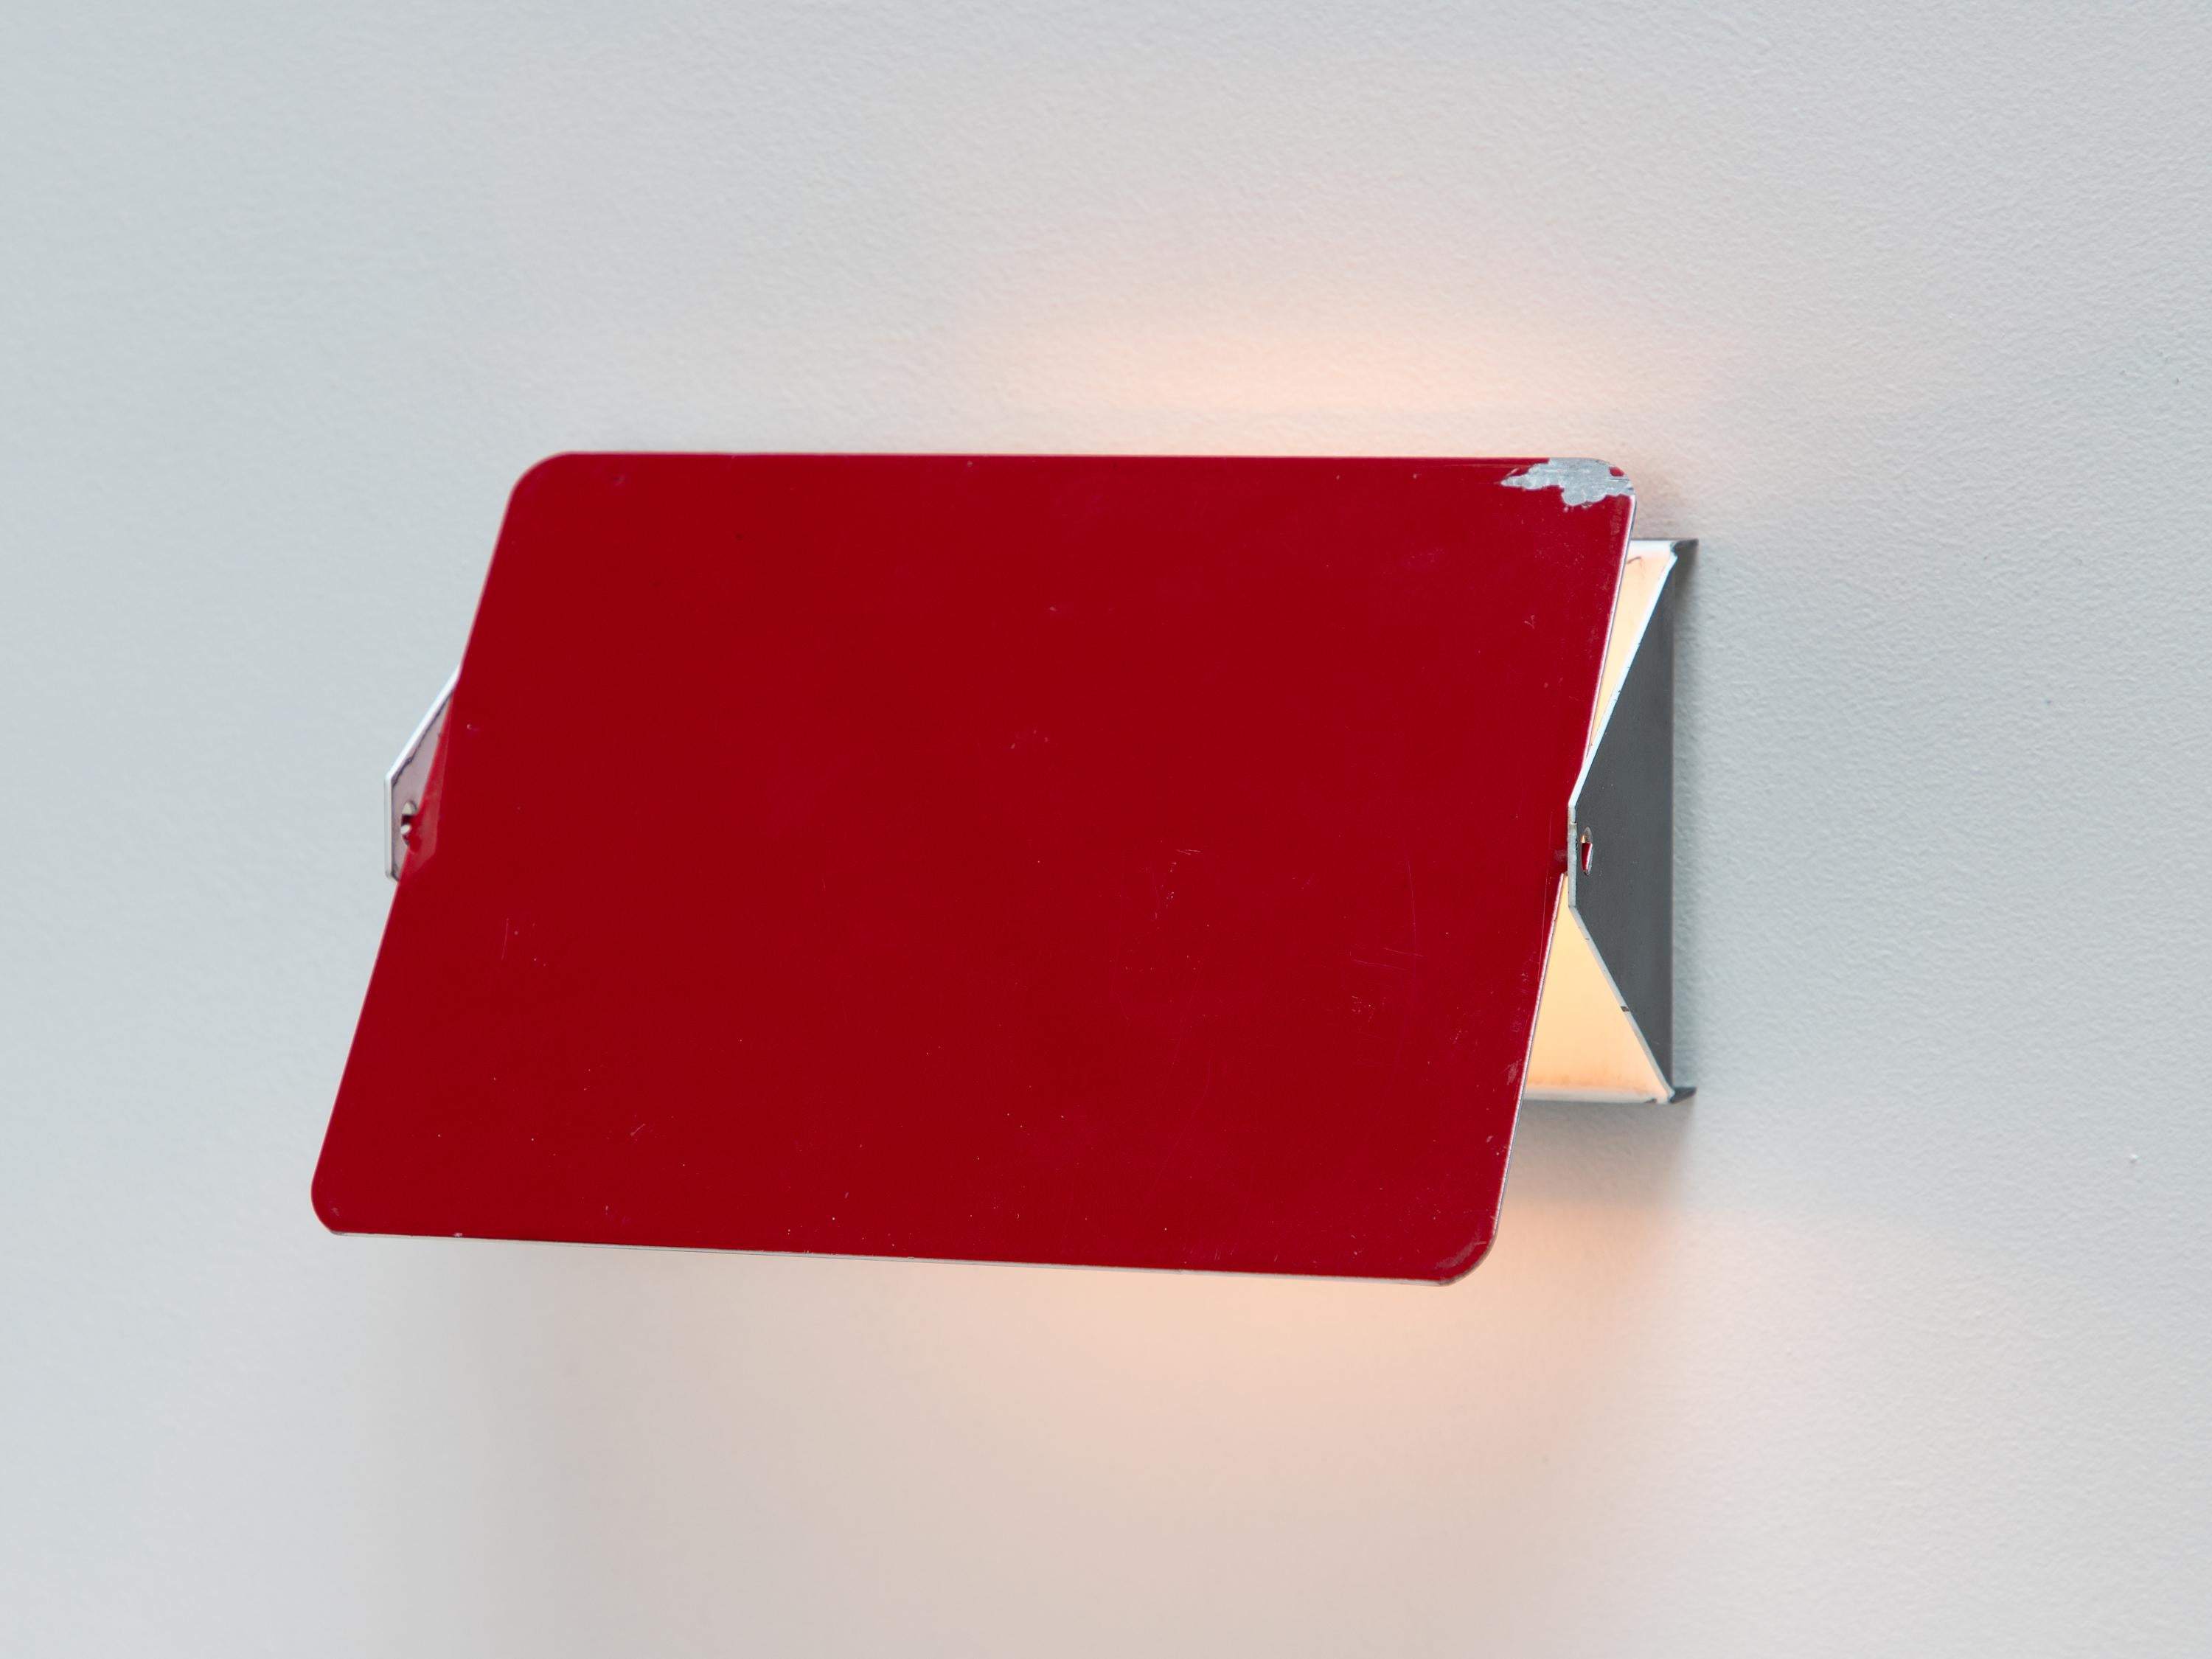 Vintage Charlotte Perriand Les Arcs CP1 Wall Light or Sconces - Crimson Red For Sale 2